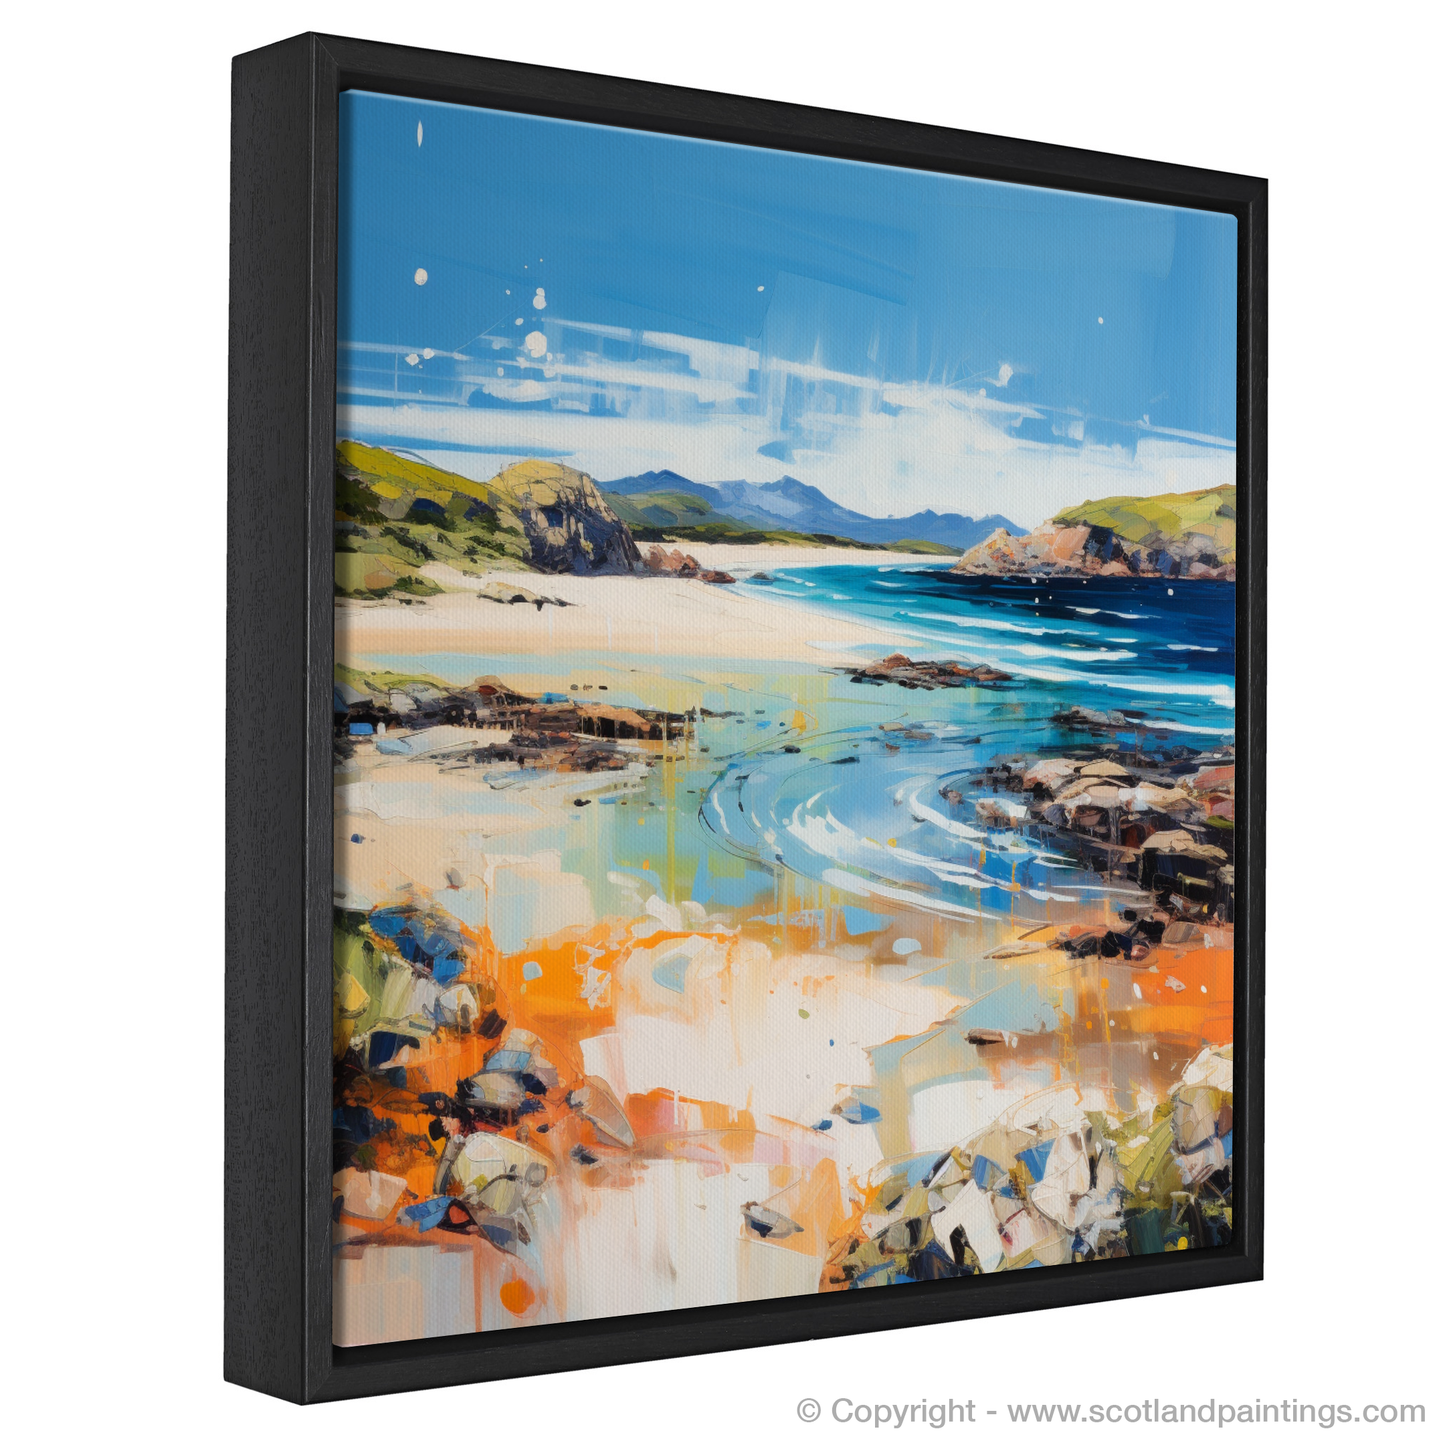 Painting and Art Print of Camusdarach Beach, Arisaig entitled "Dance of Light and Colour: An Expressionist Ode to Camusdarach Beach Arisaig".